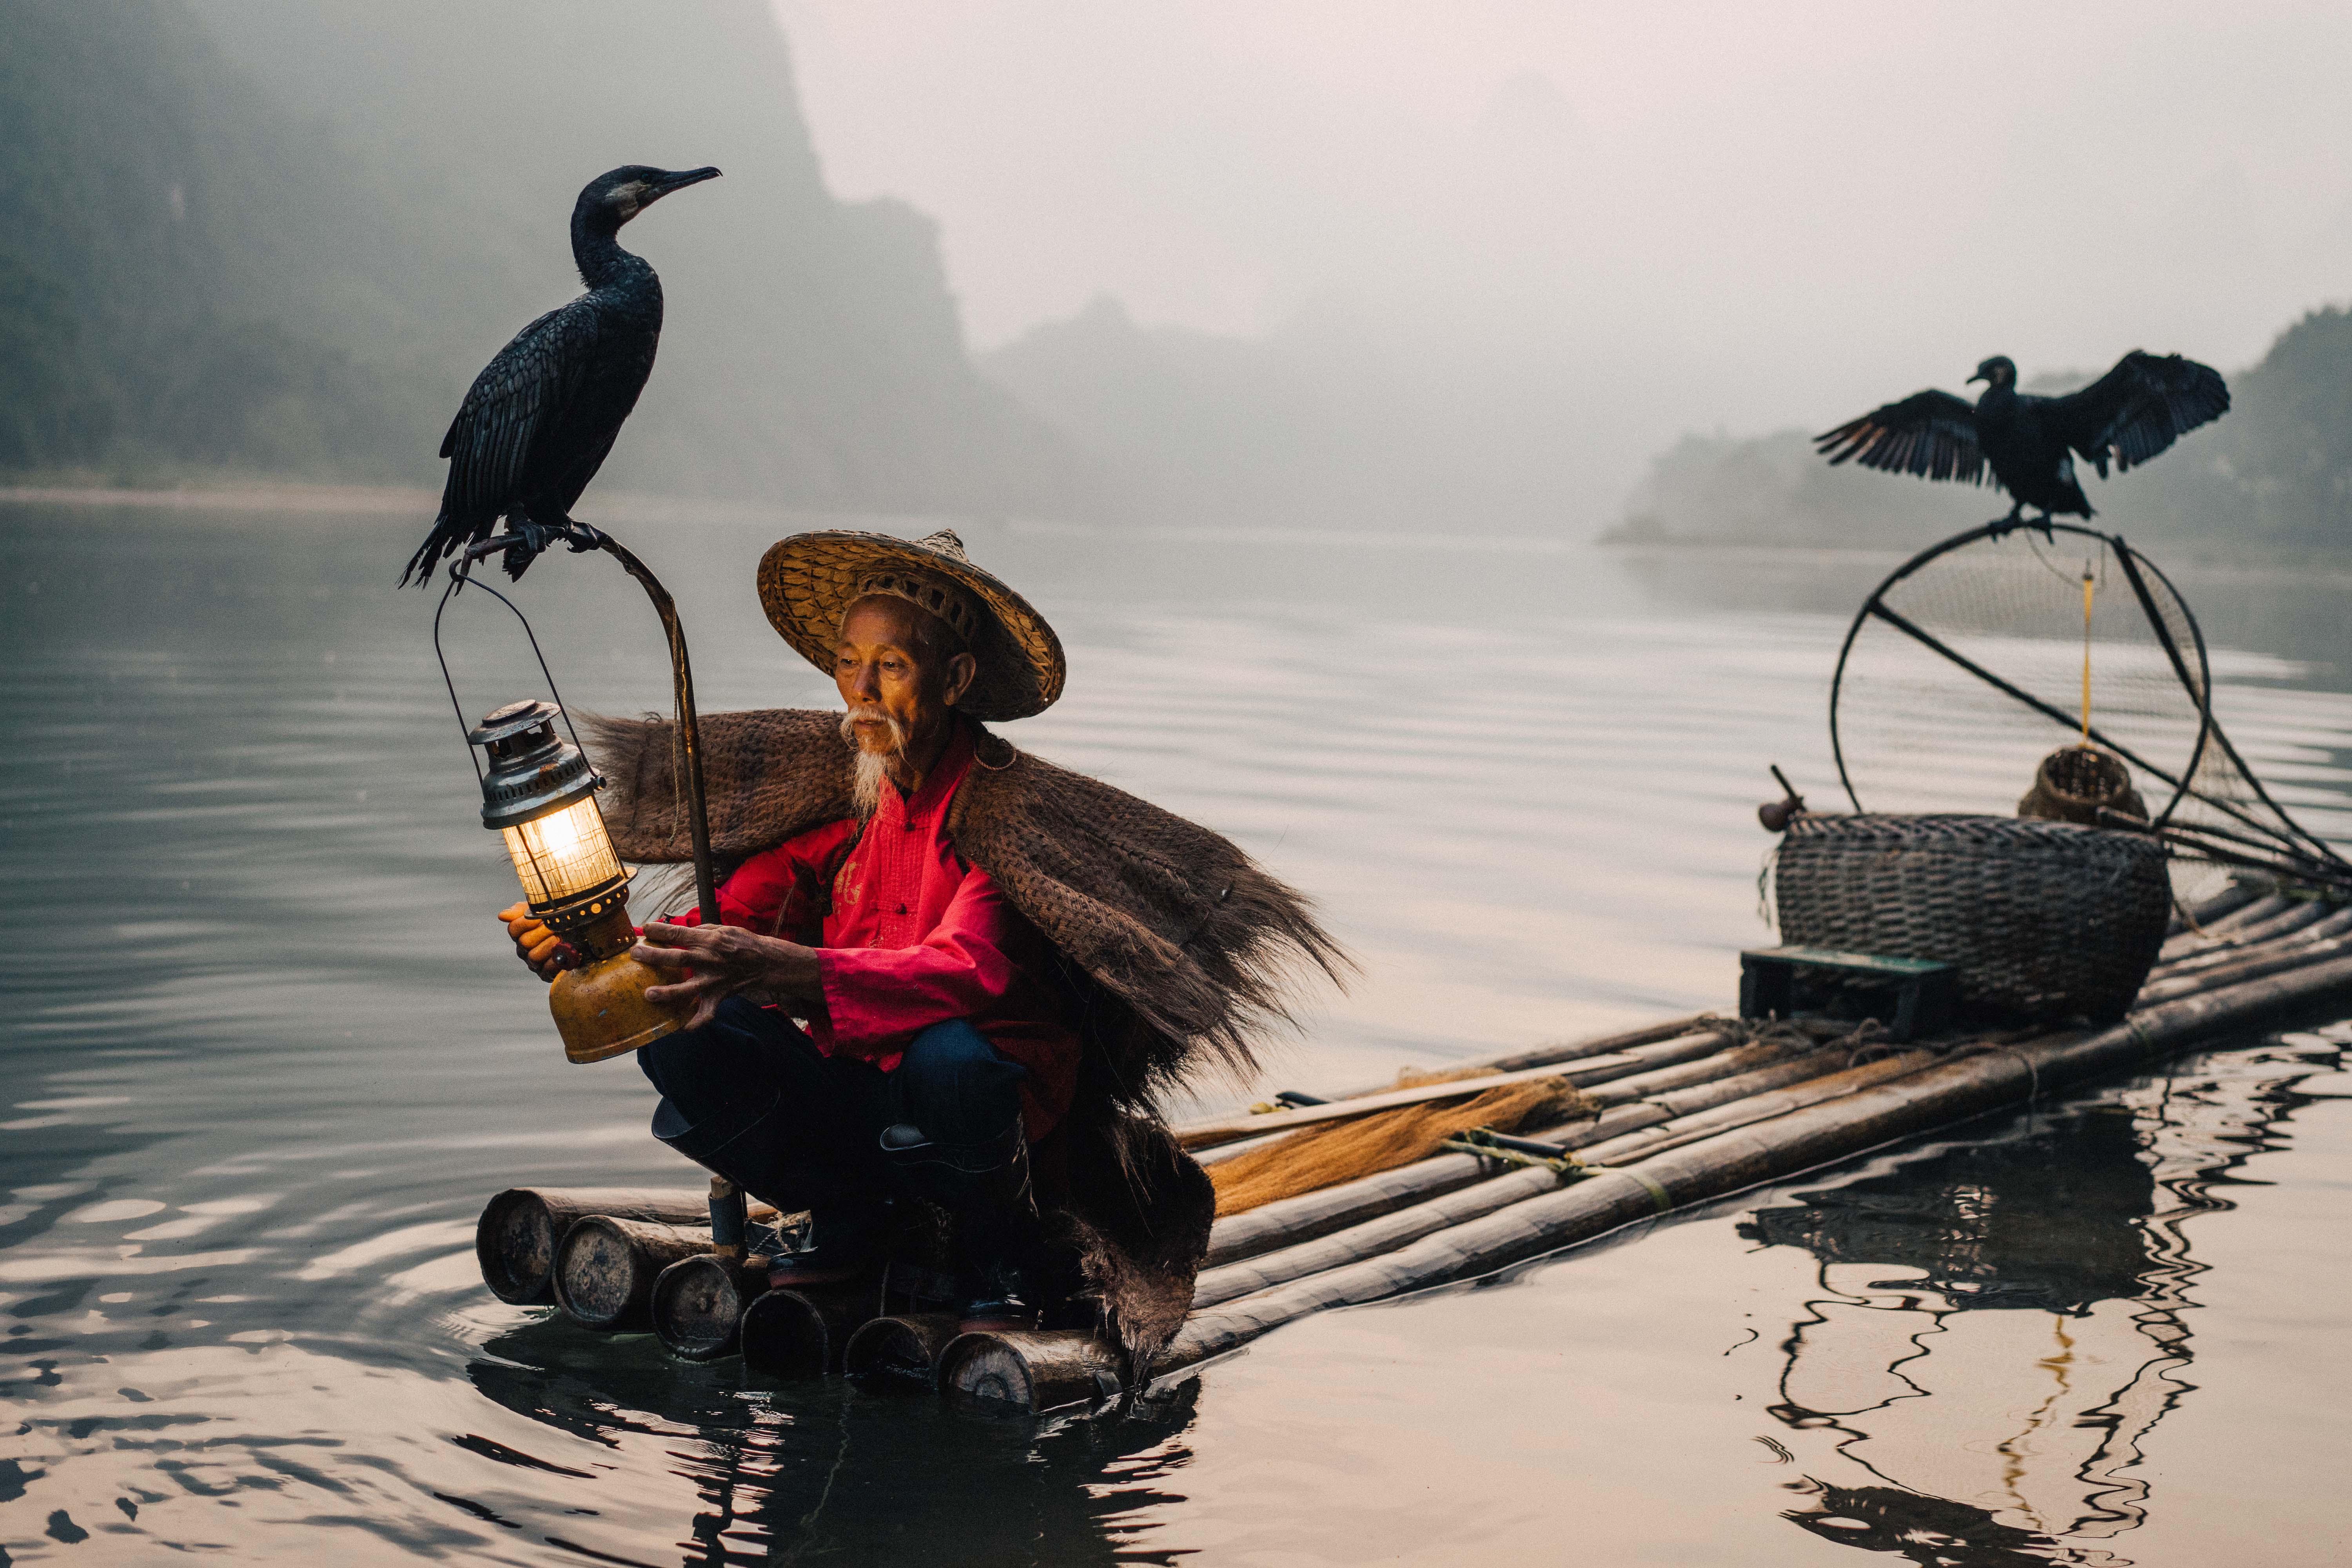 Gas lamps are hung on the boat to lure fish for the trained cormorants to catch them.  A fishing technique that has been passed down for 1,300 years in China. 
